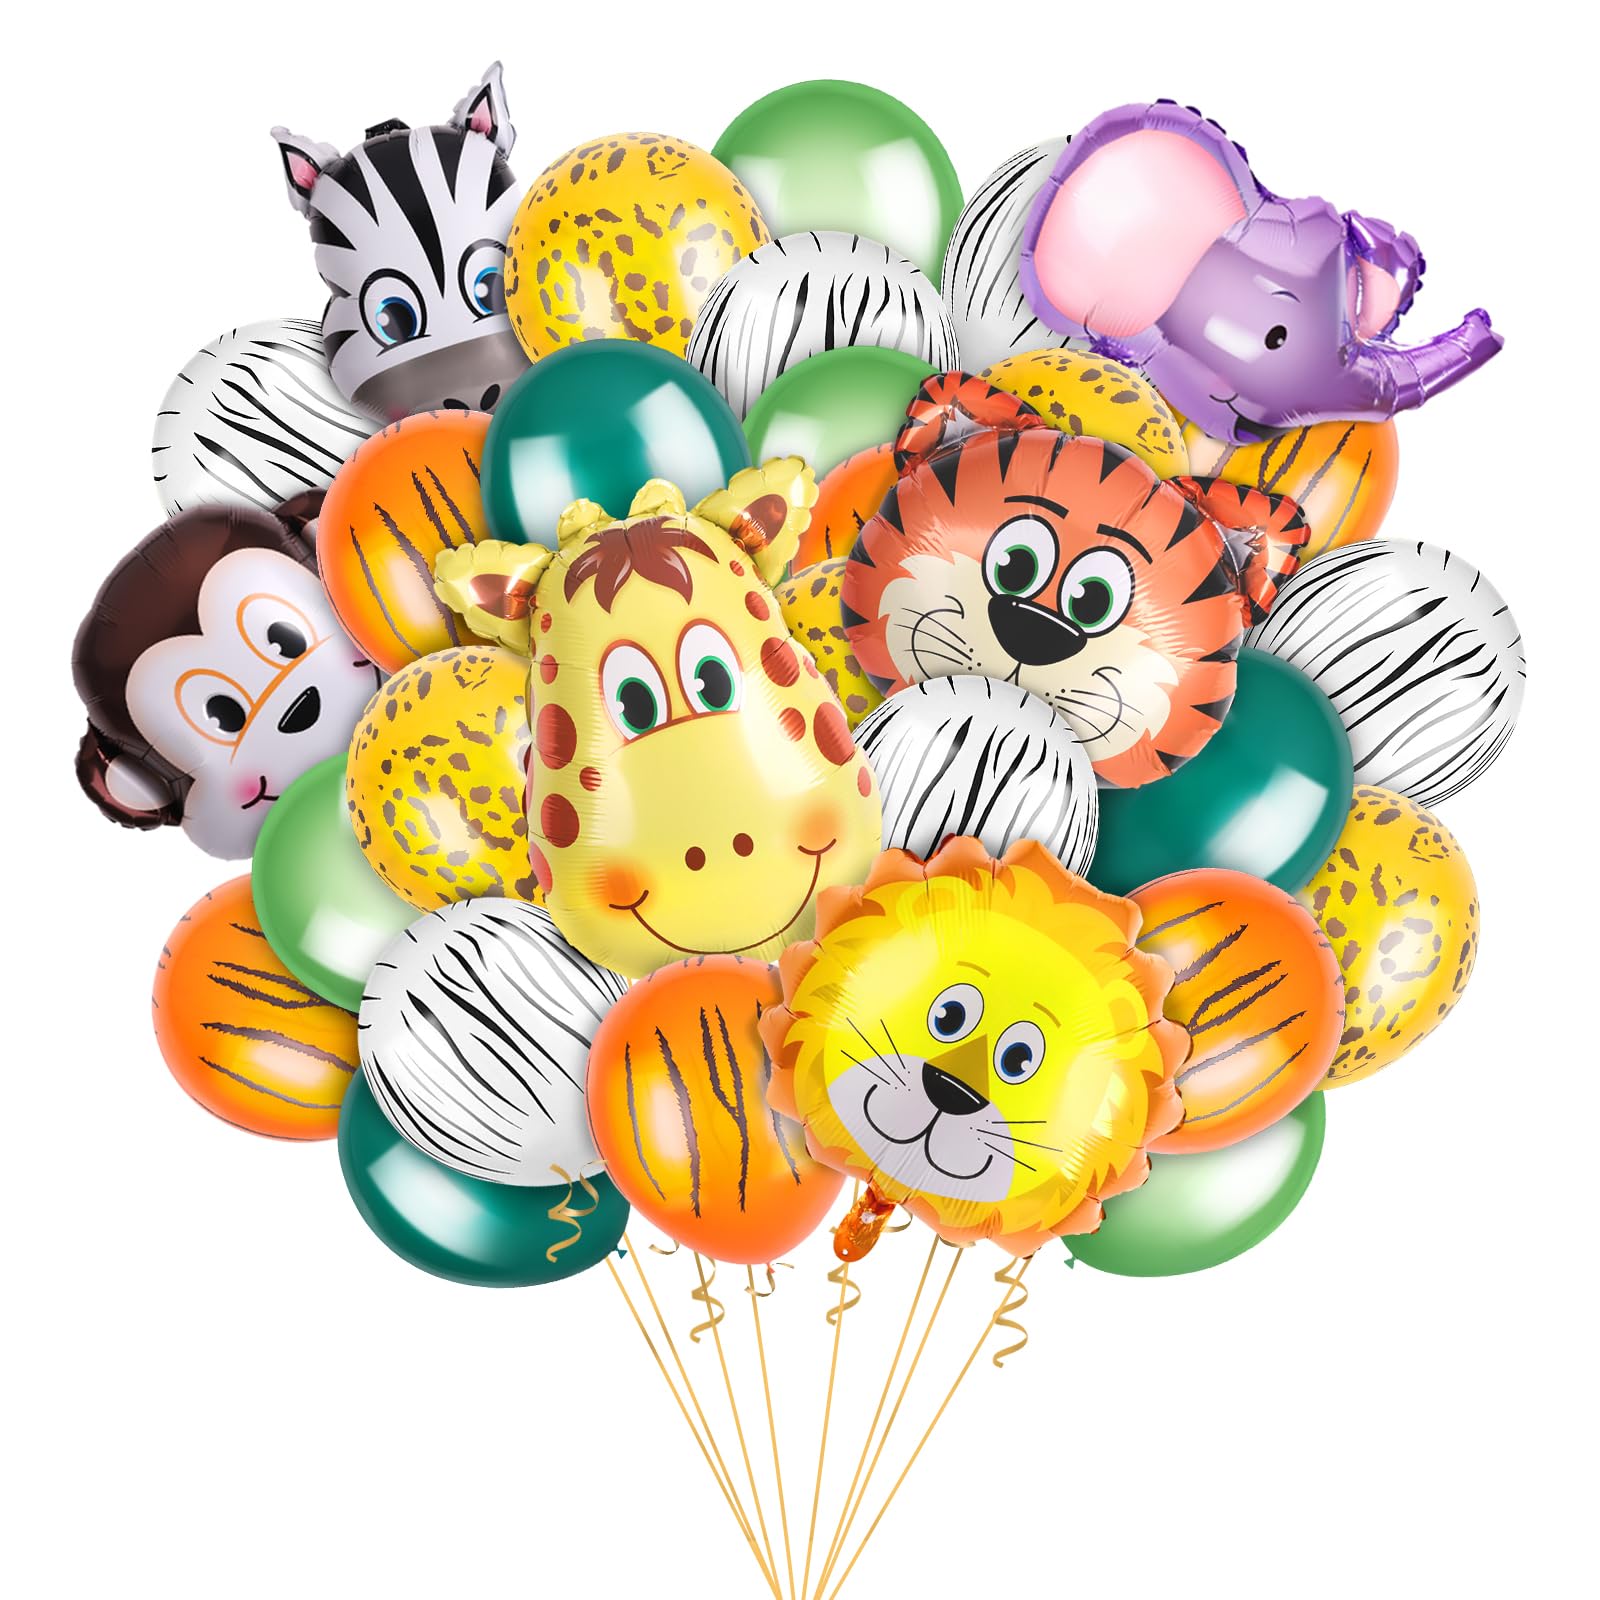 30 Pieces Jungle Safari Birthday Party Decorations, 6 Pack Giant Safari Animal Balloons, 24 Pcs 12 Inch Jungle Animal Print Balloons for Wild One Birthday Party, Baby Shower, Zoo Party Decorations